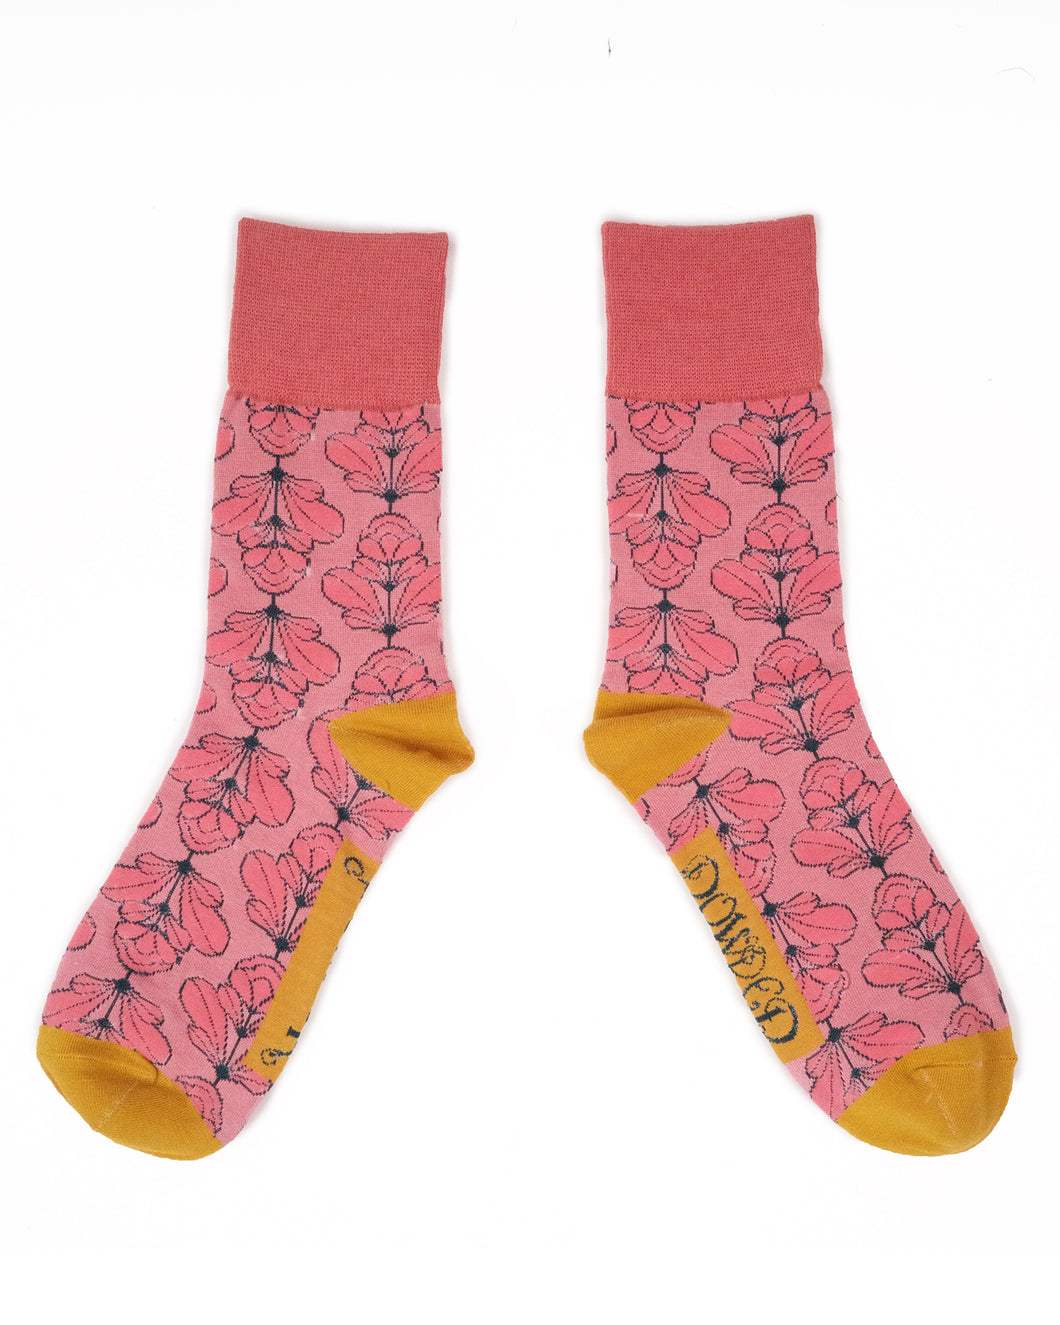 Deco Floral Socks - Candy